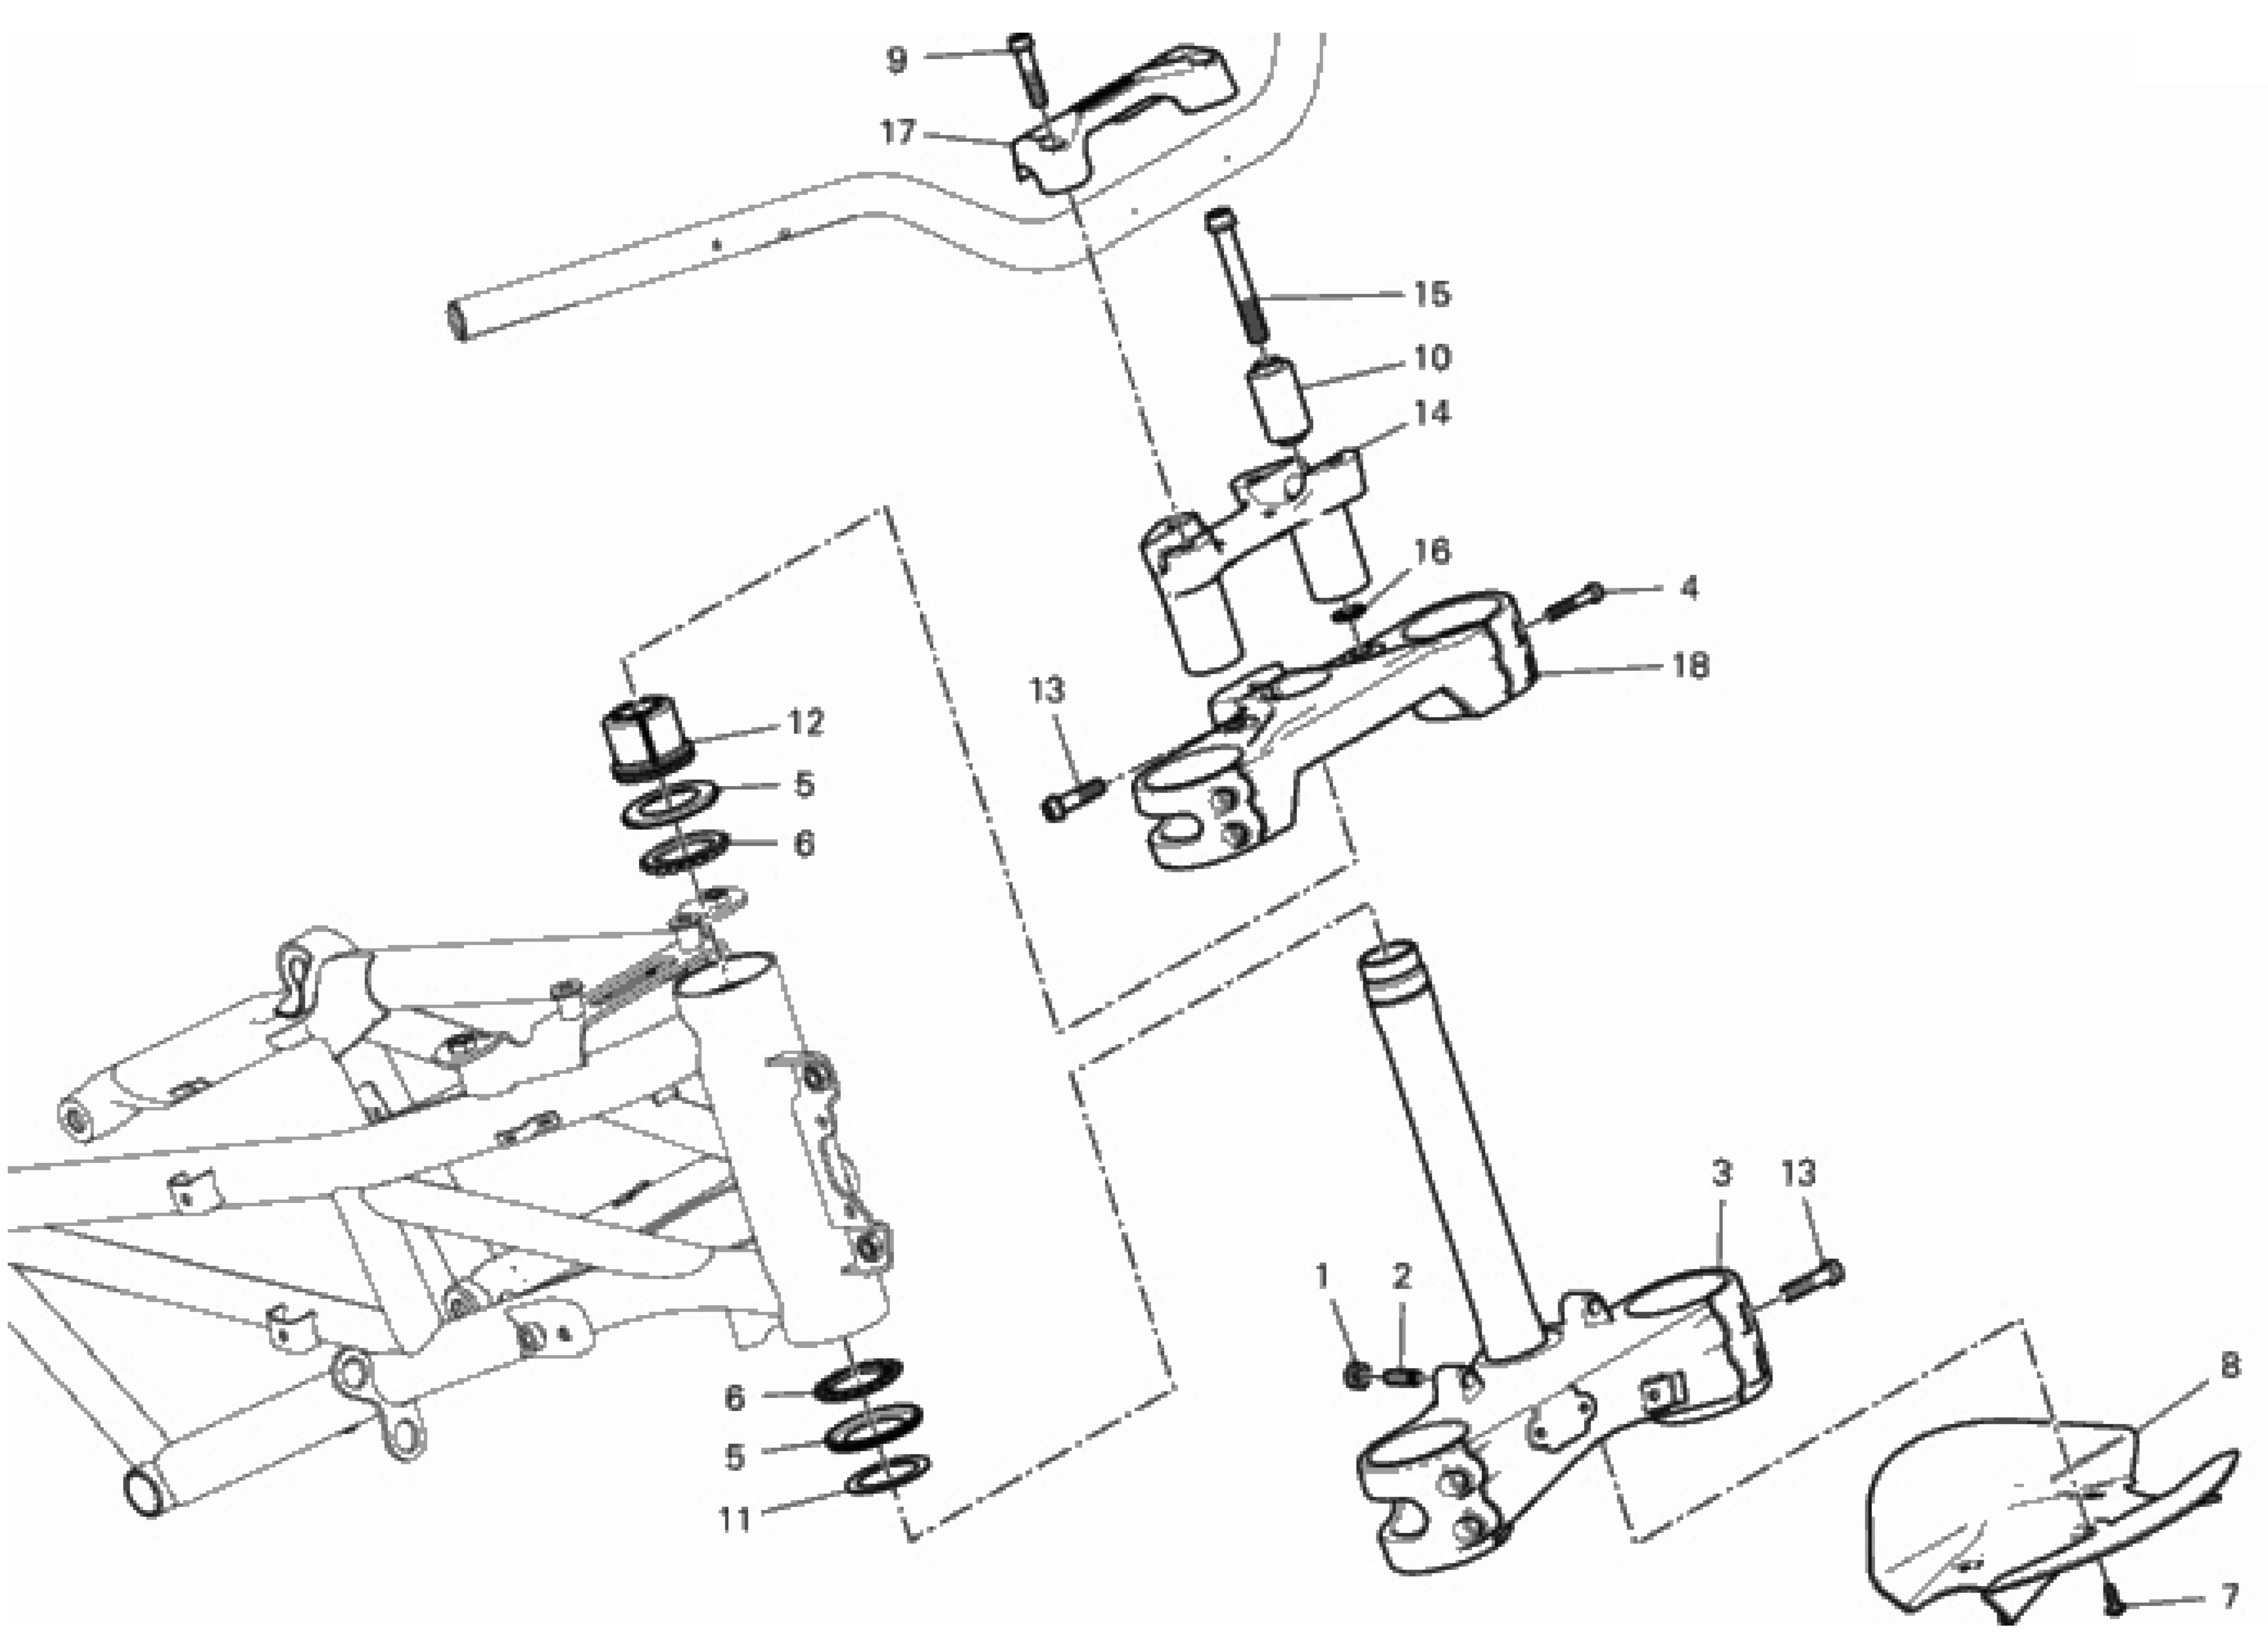 STEERING HEAD BASE ASSEMBLY 